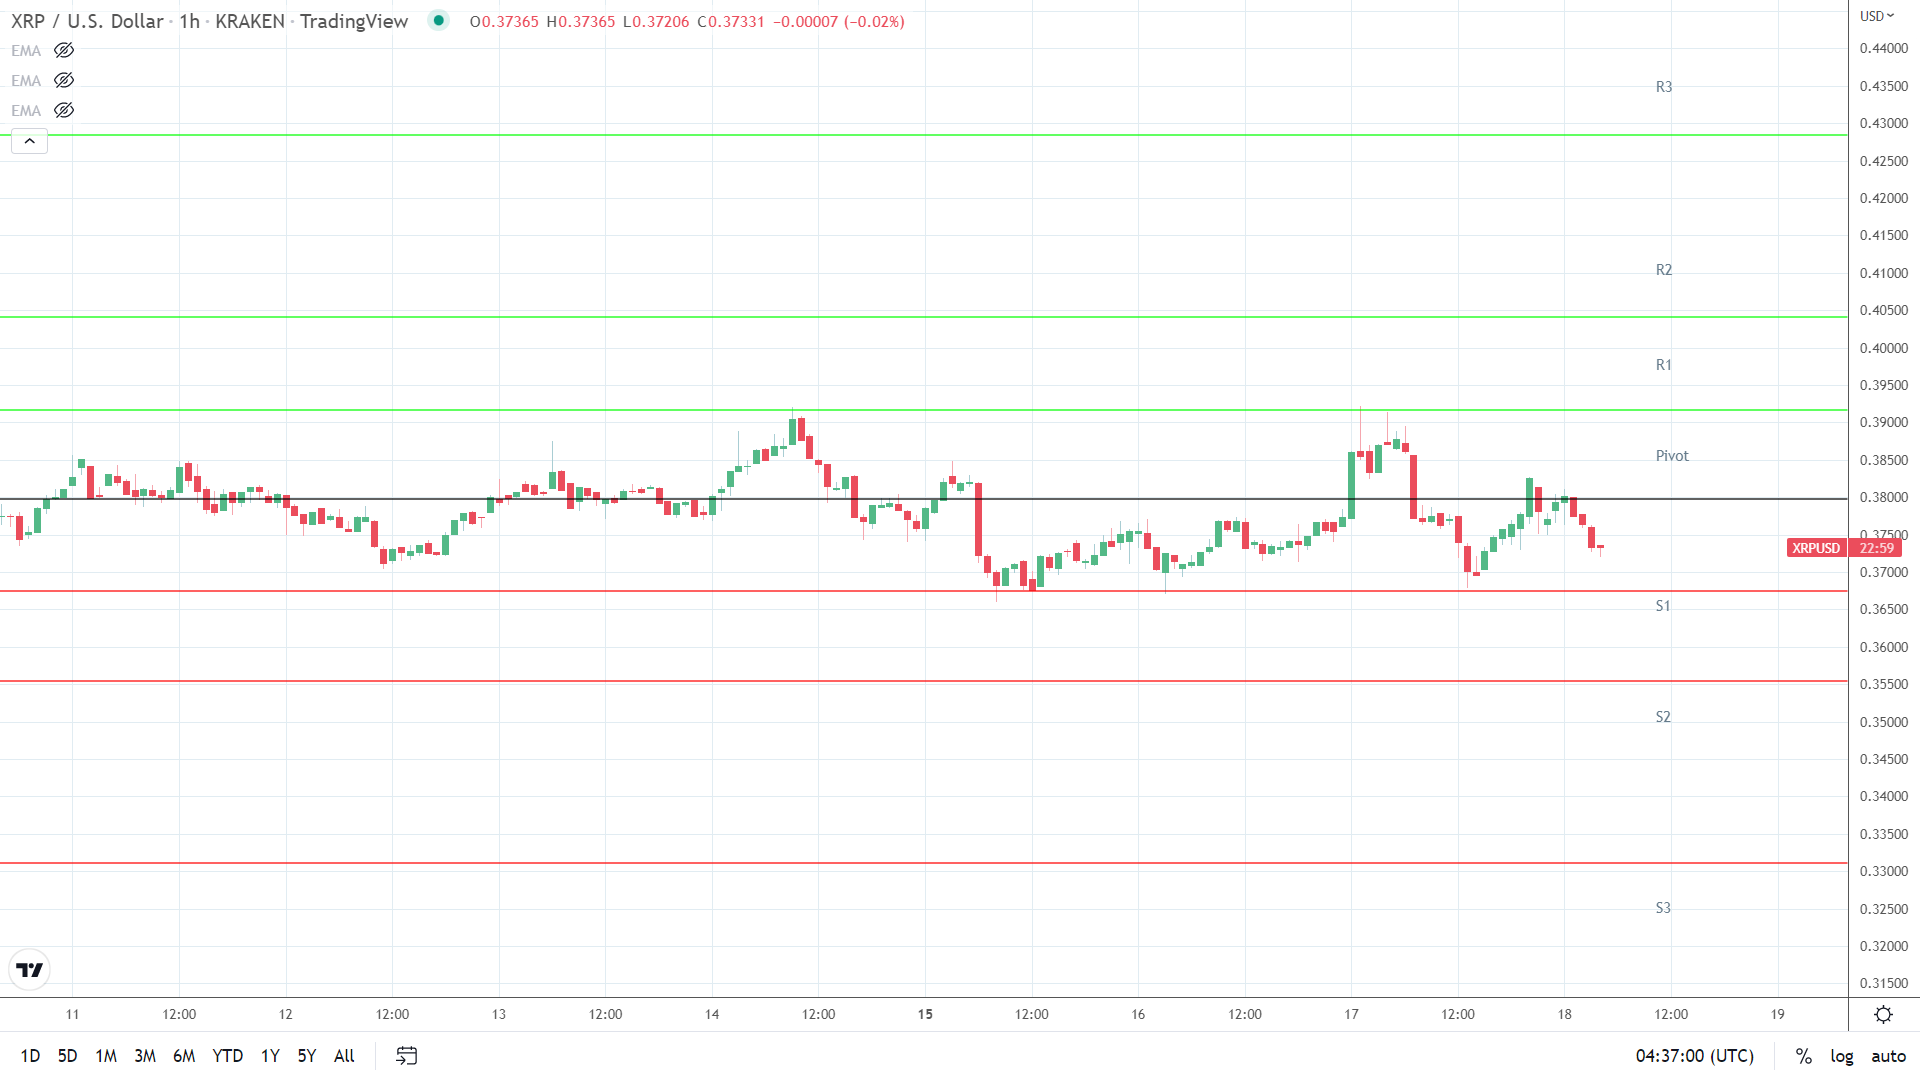 XRP support levels are in play.